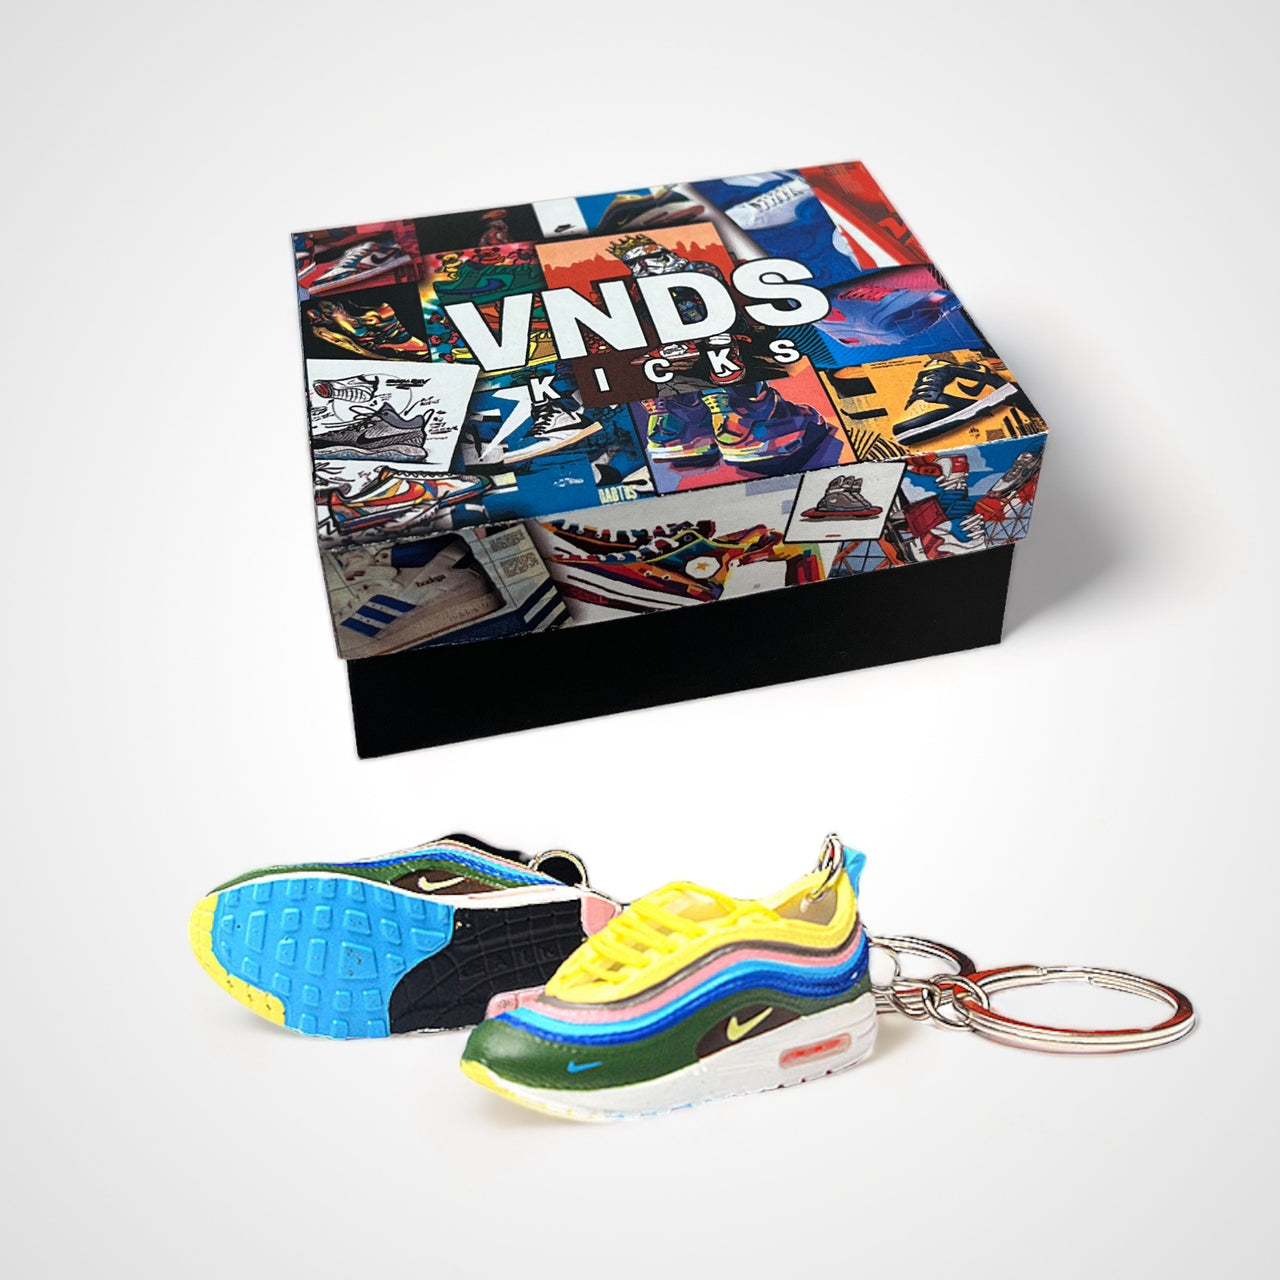 Air Max 97 "Sean Wotherspoon" - Sneakers 3D Keychain